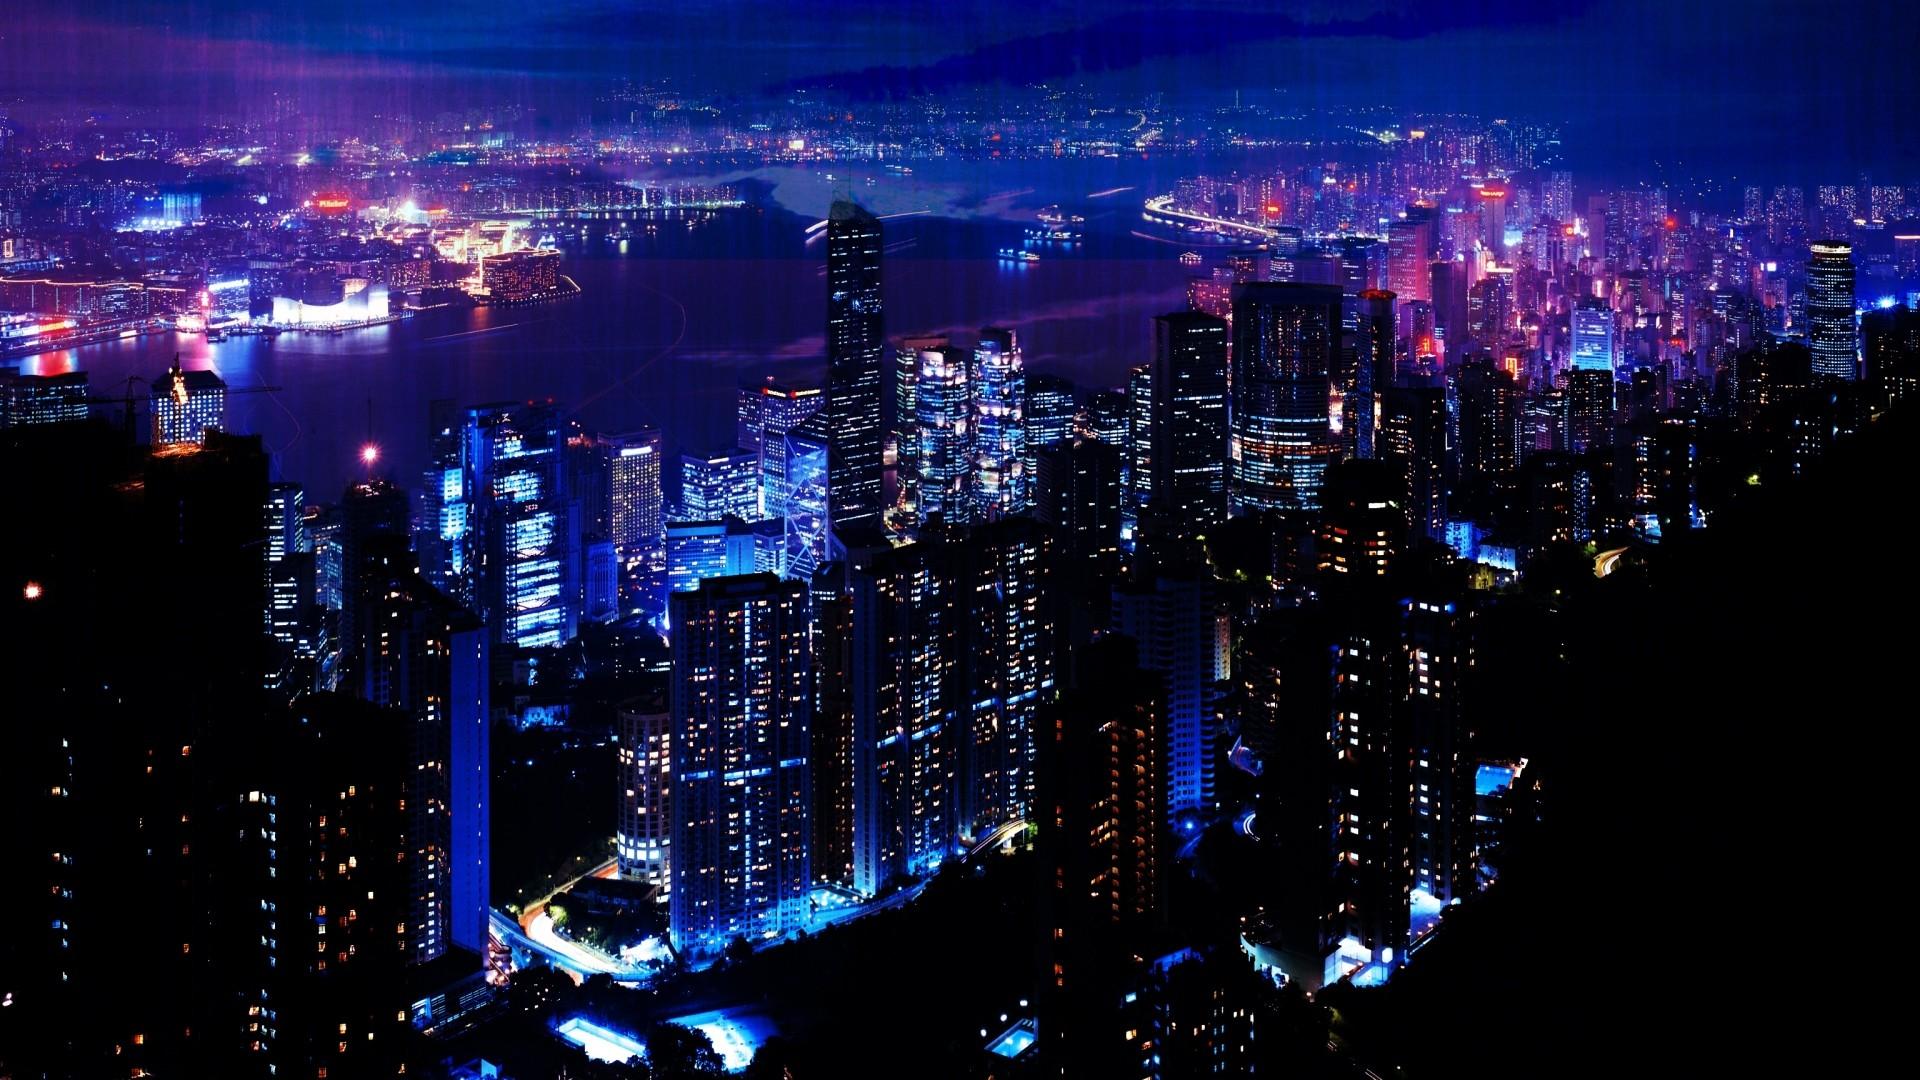 Night Anime City 1920x1080p Wallpapers - Wallpaper Cave